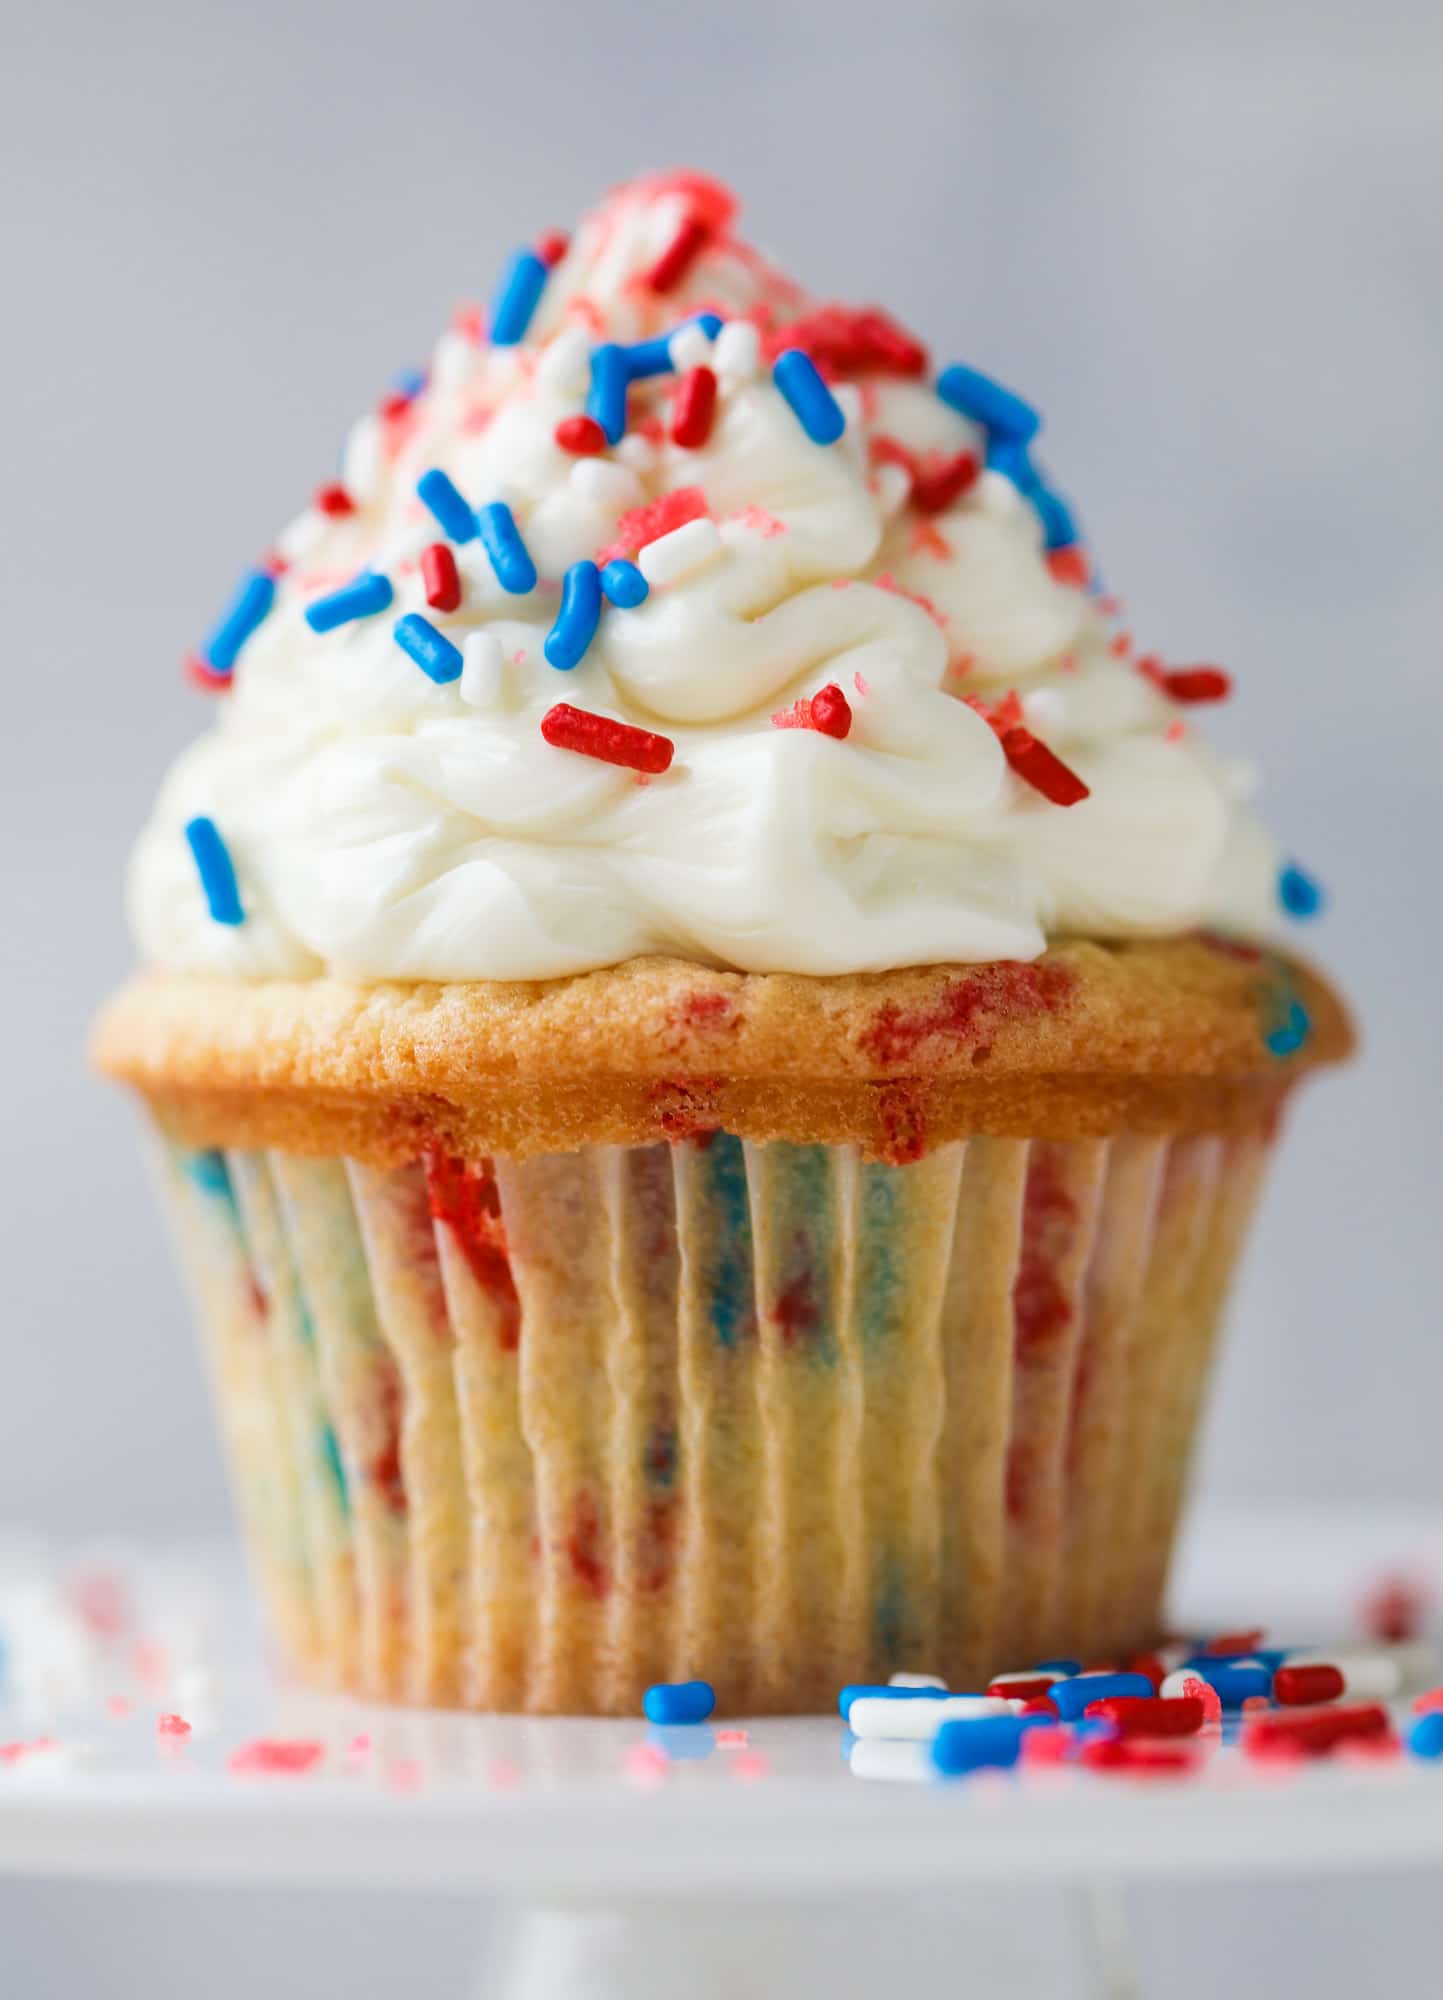 These 4th of July confetti cupcakes are super fun! Firecracker cupcakes with red, white and blue sprinkles and pop rocks candy on top for crackle! 